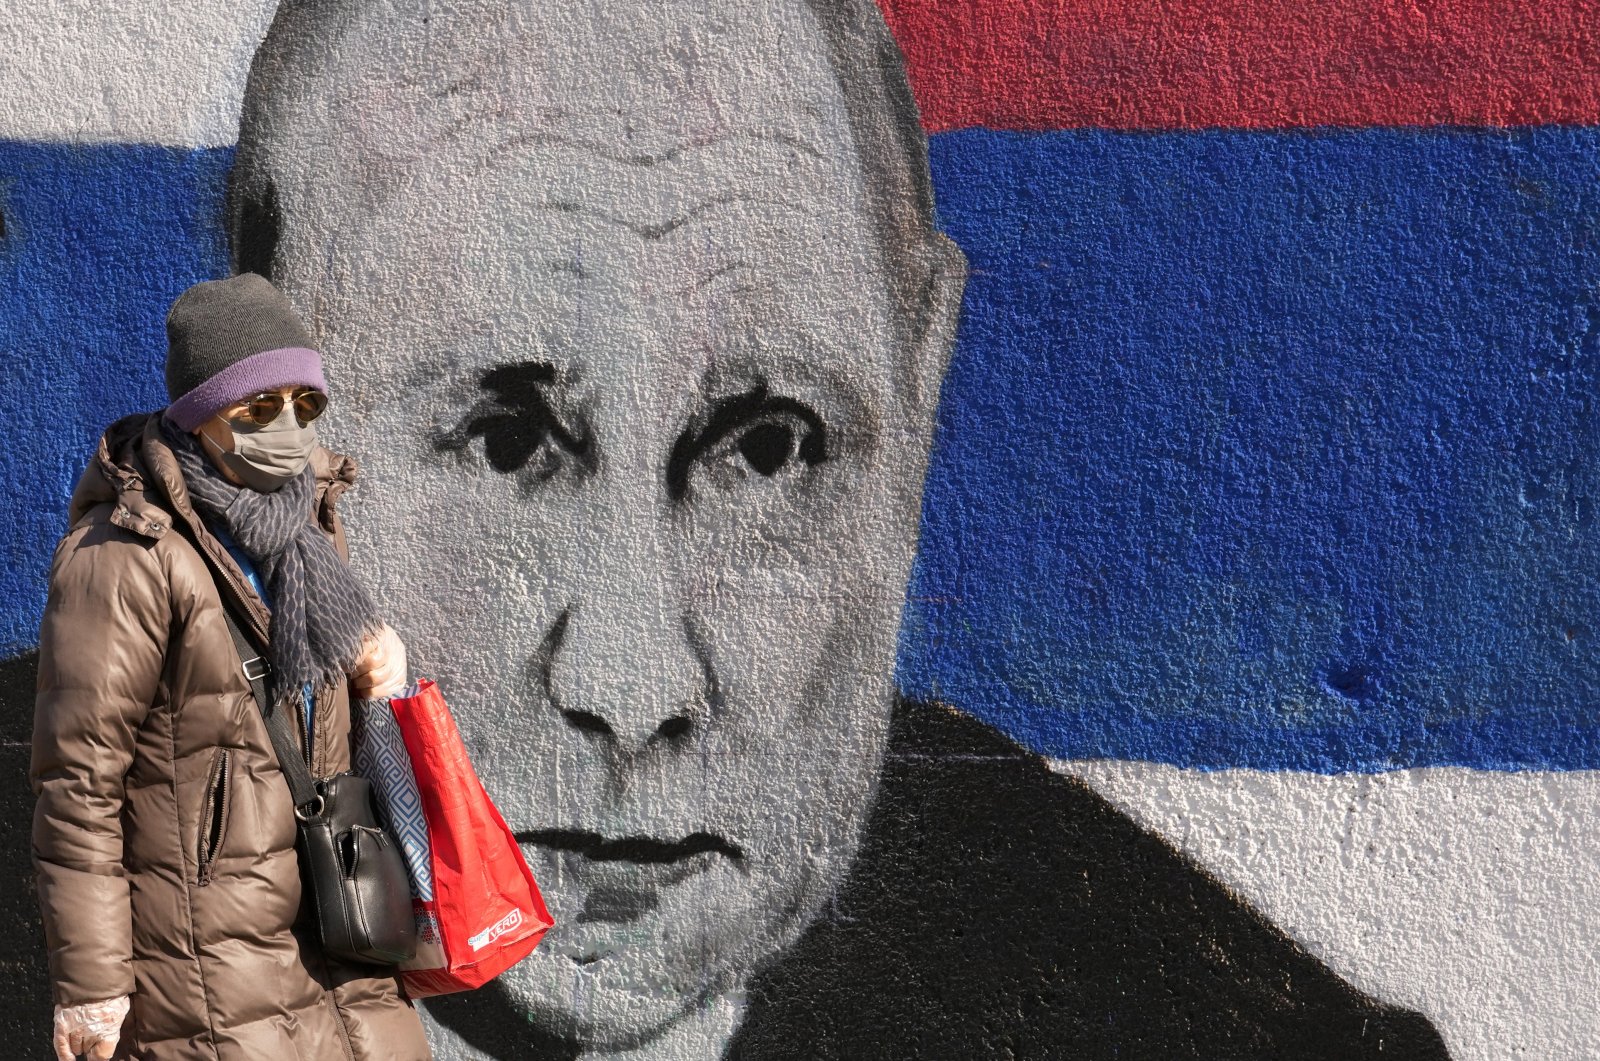 A woman passes by a mural depicting the Russian President Vladimir Putin in Belgrade, Serbia, March 12, 2022. (AP Photo)